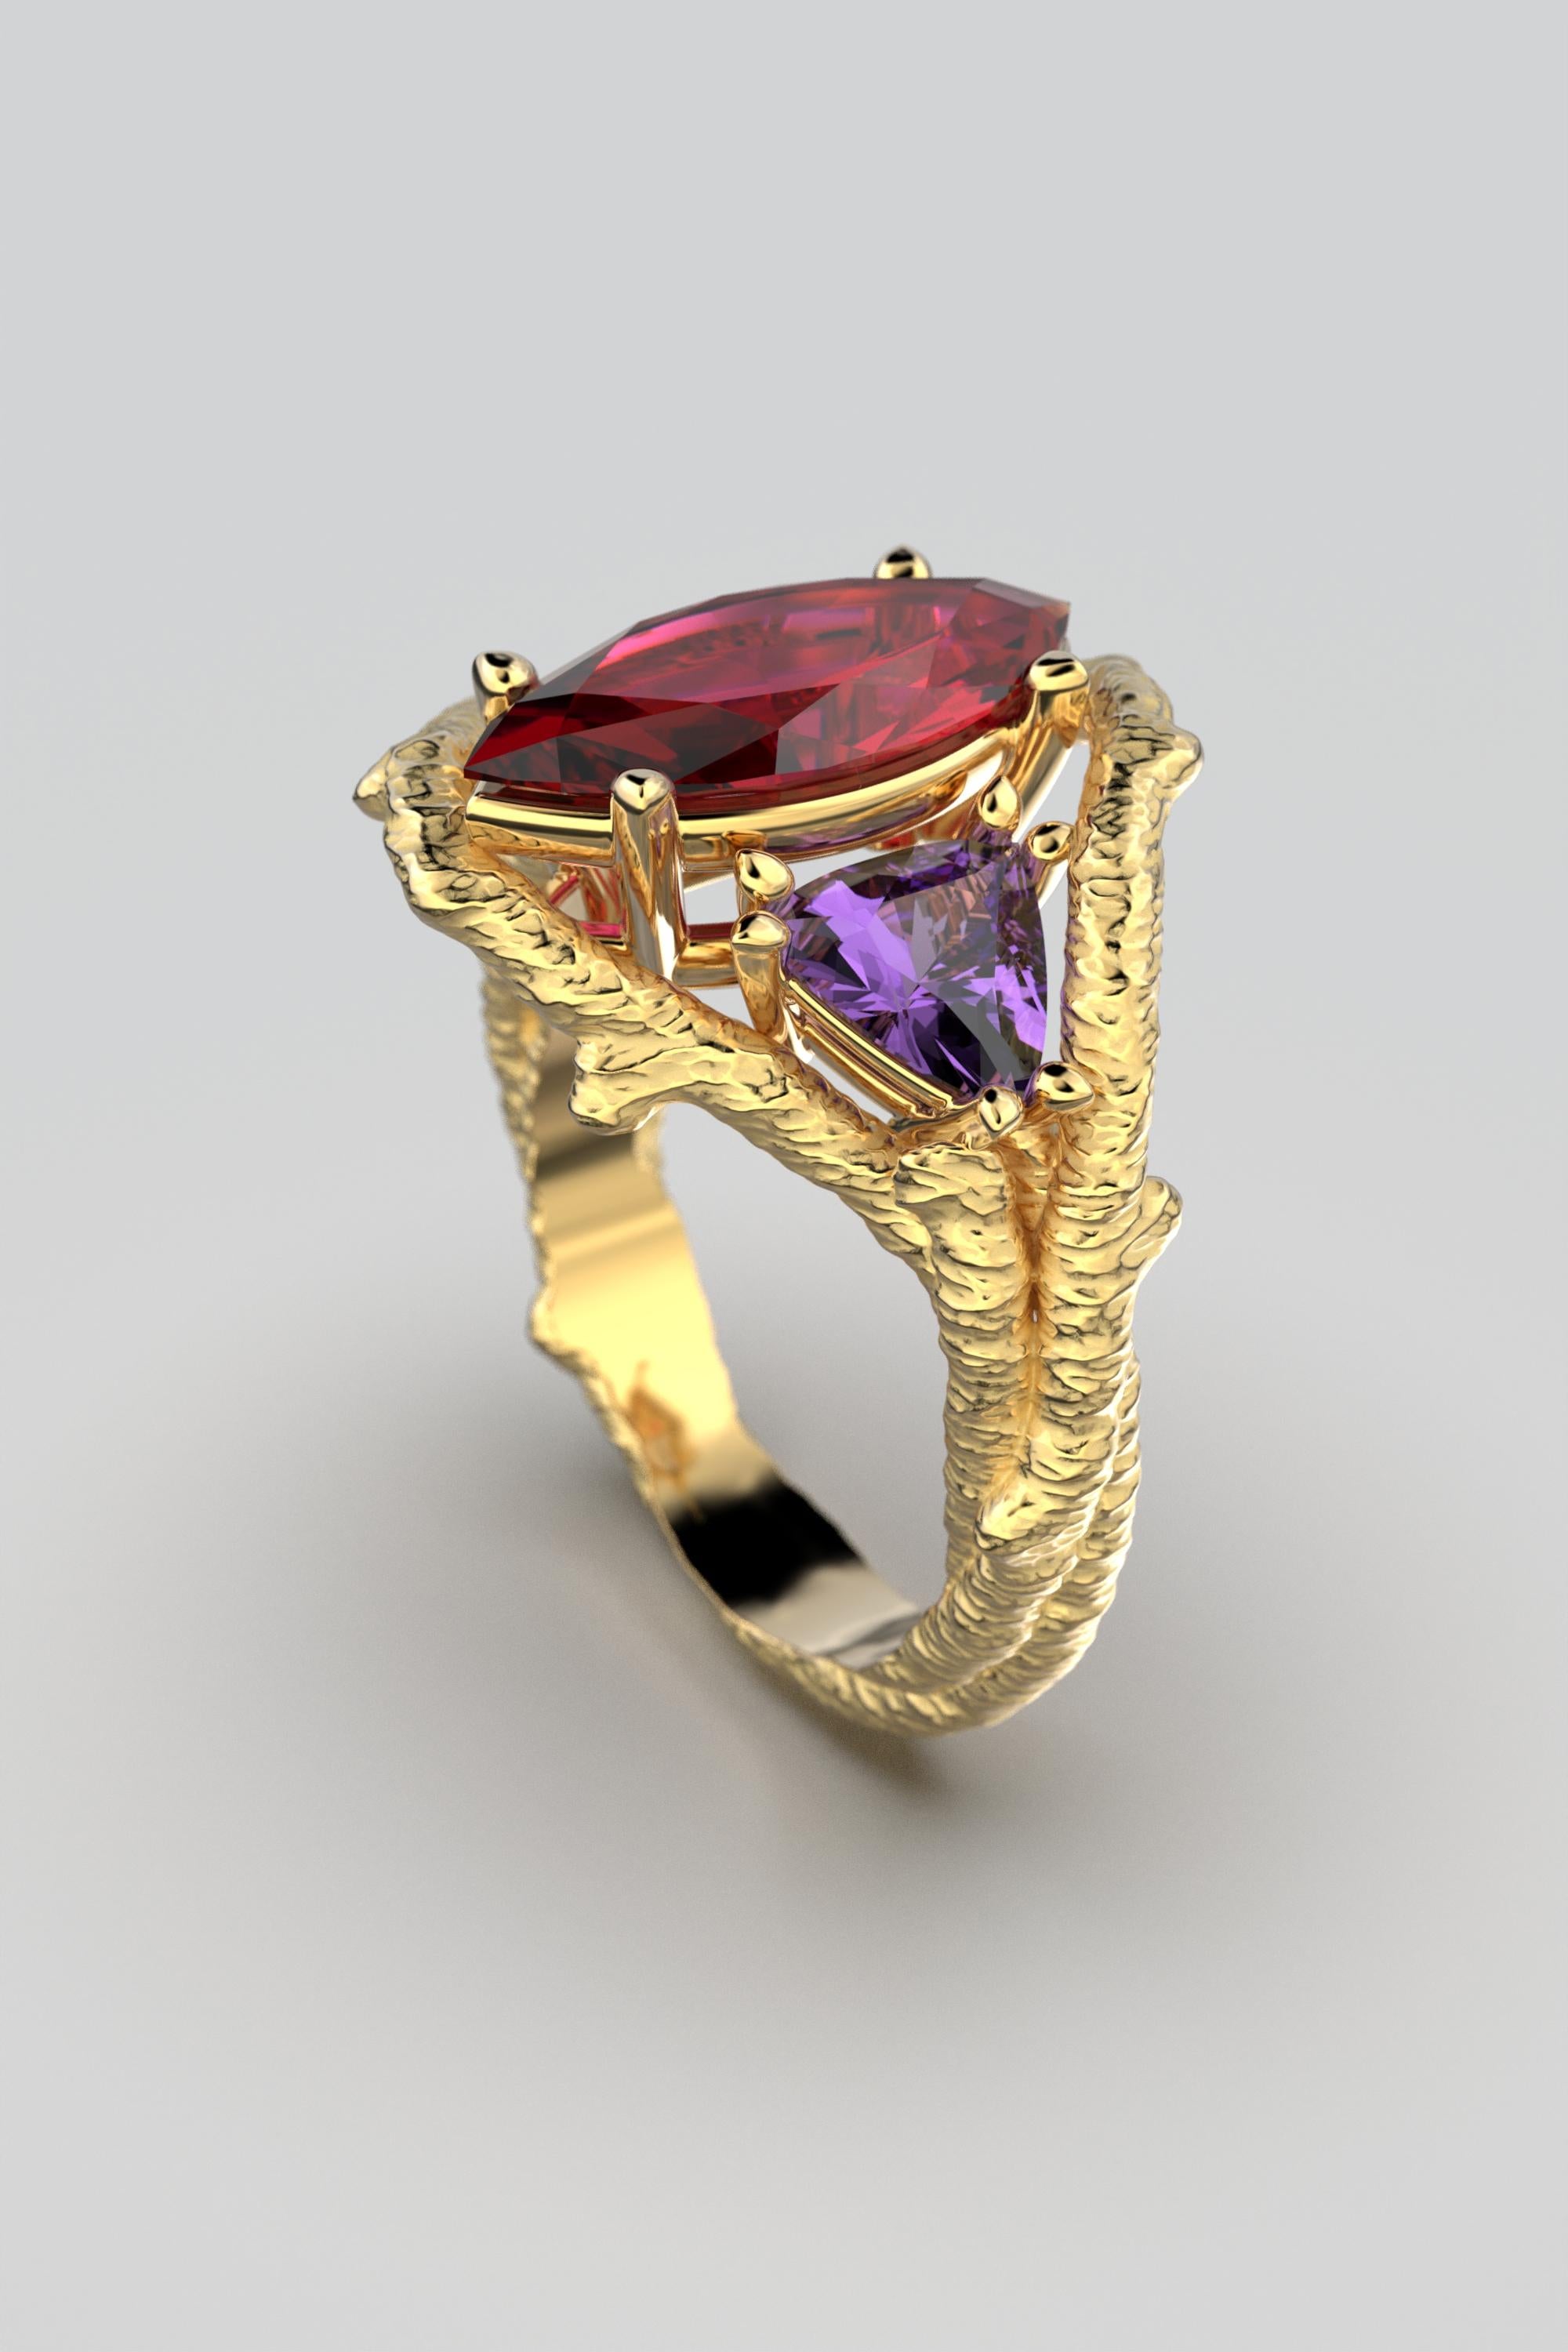 For Sale:  Nature Inspired 18k Solid Gold Gemstone Ring Made in Italy by Oltremare Gioielli 13